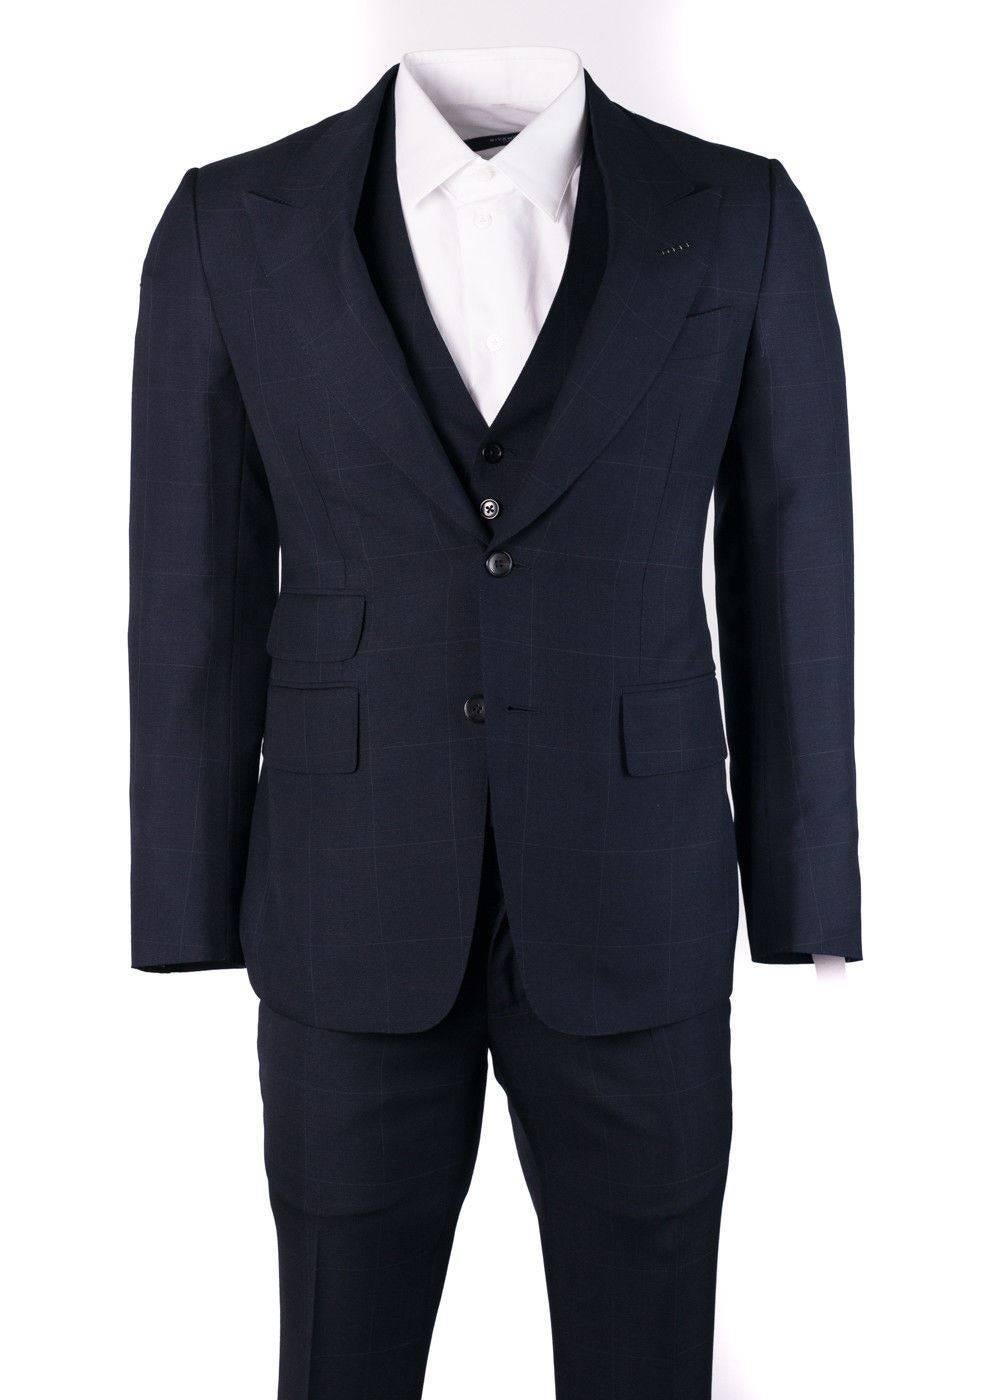 tom ford 3 piece suit